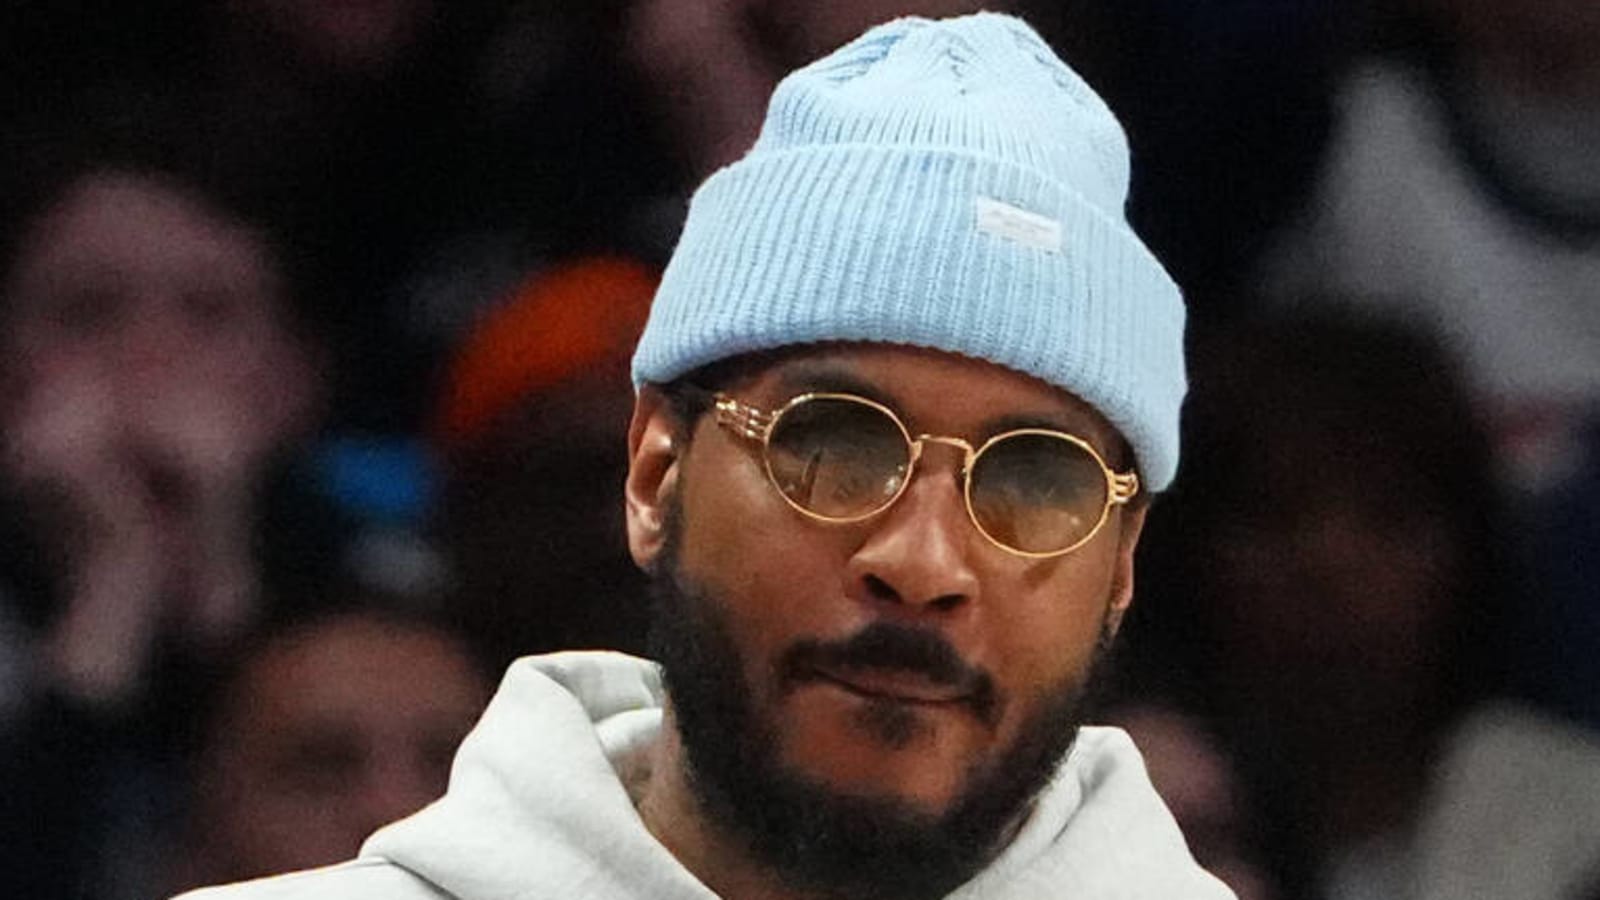 Nets considering signing Carmelo Anthony, another center